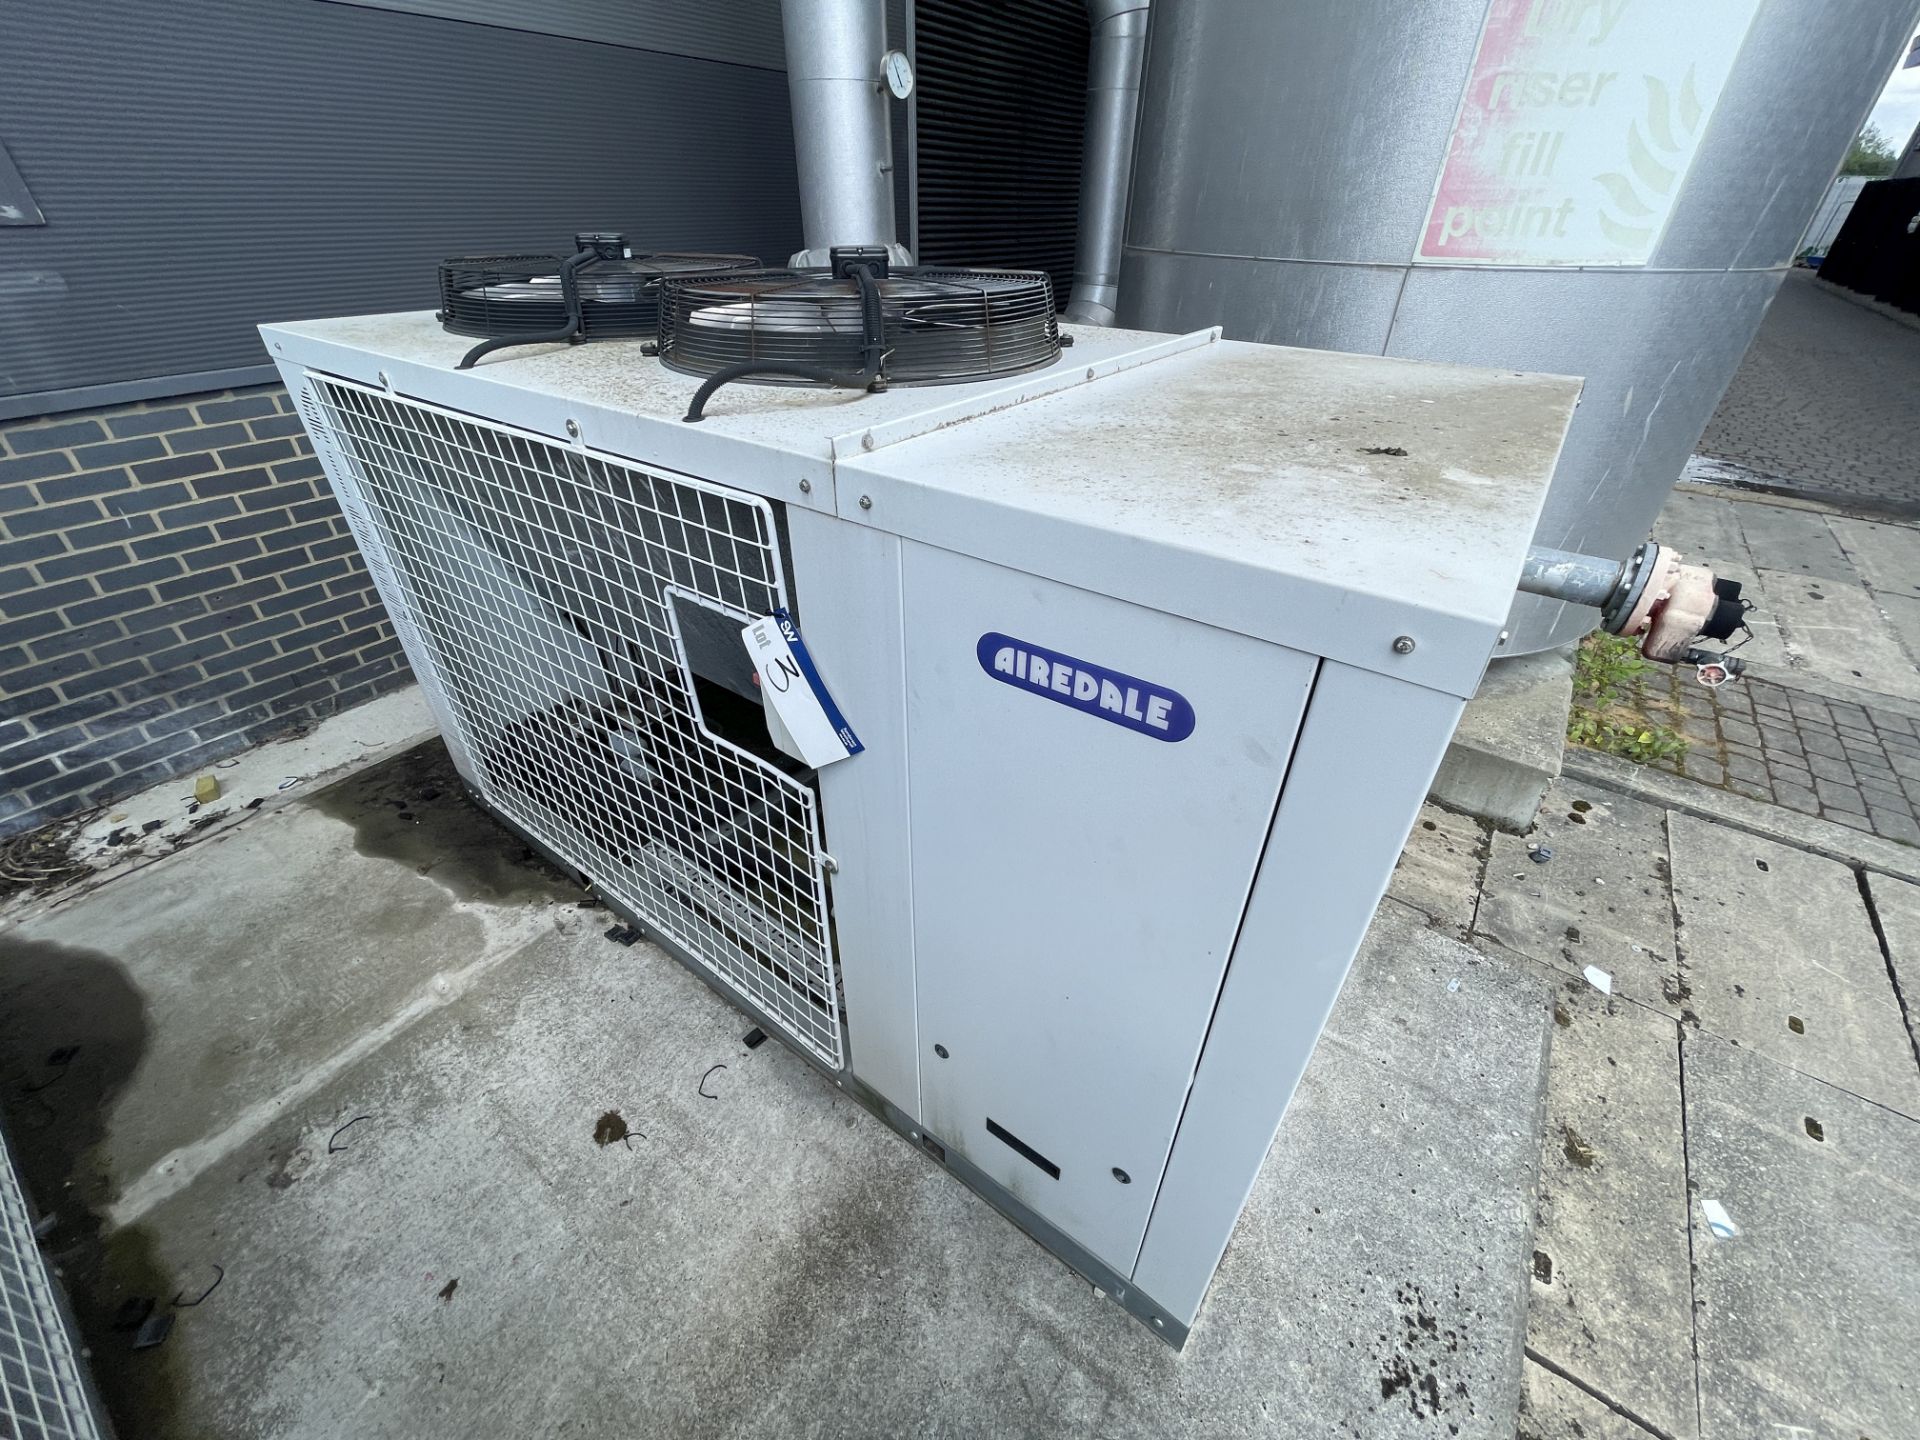 Airedale TWIN FAN CHILLER UNIT, overall size 2.3m x 1.1m x 1.3m high UNDERSTOOD TO BE MODEL